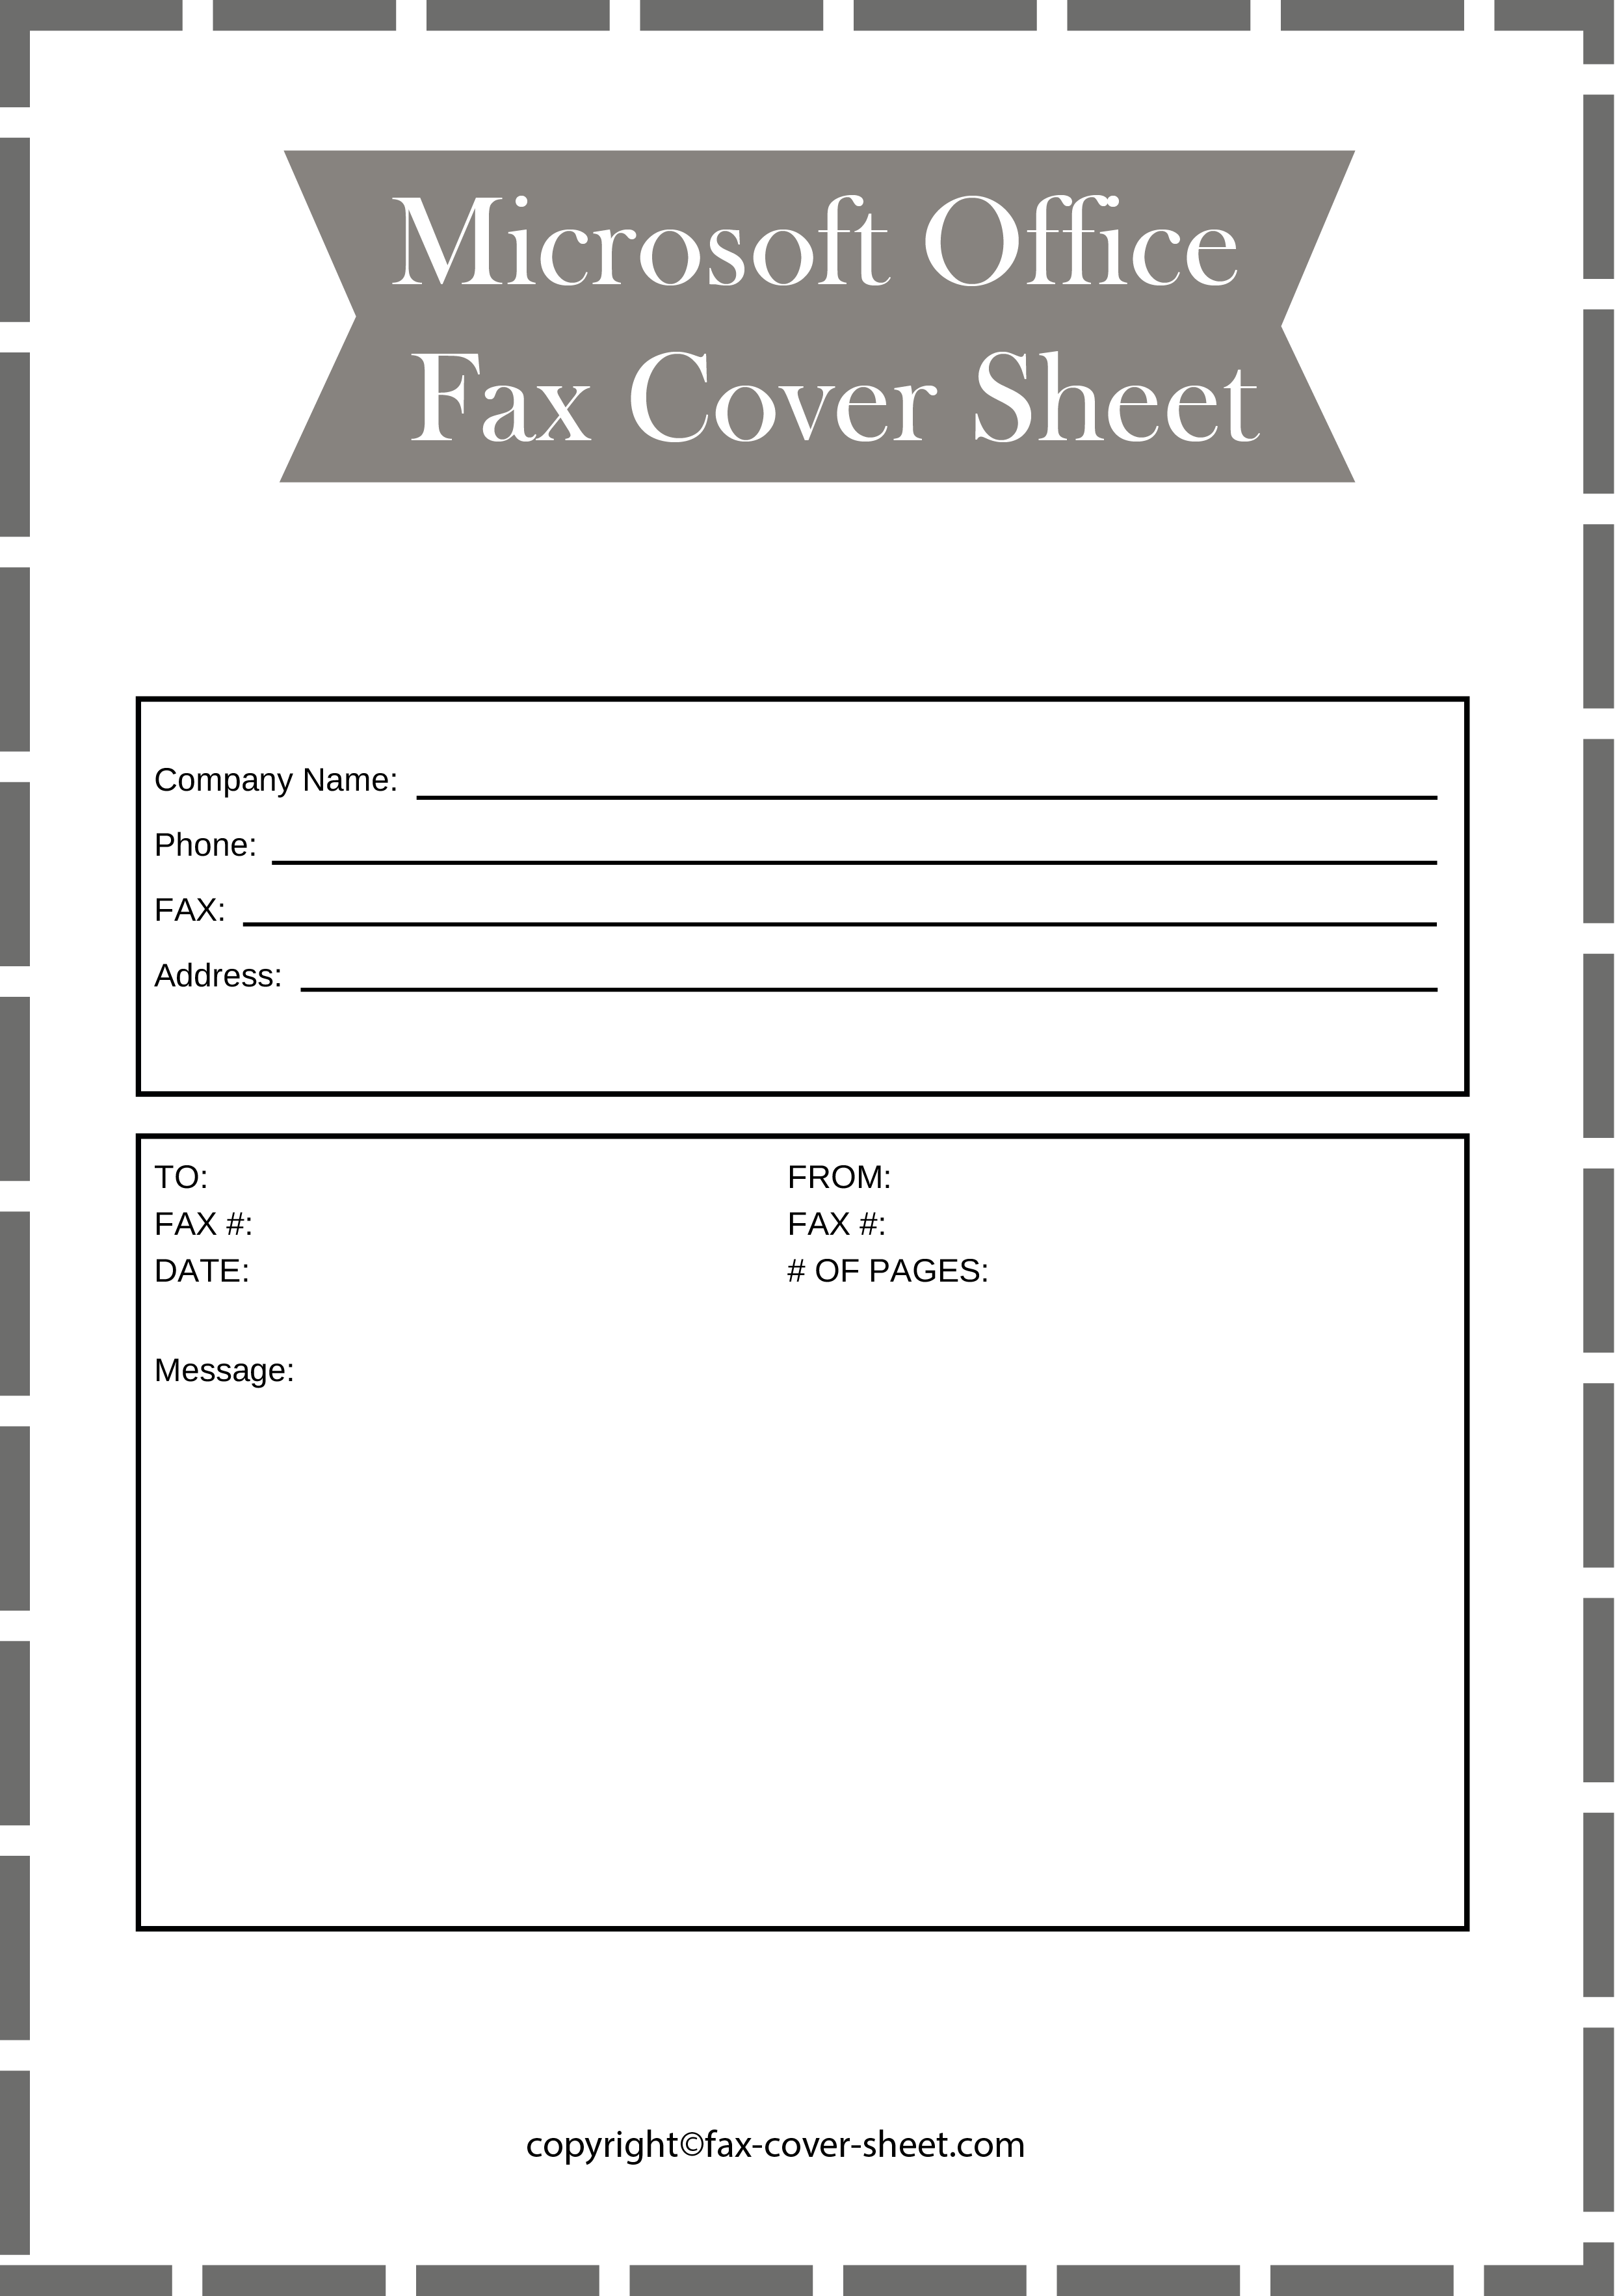 Printable Microsoft Office Fax Cover Sheet in Word